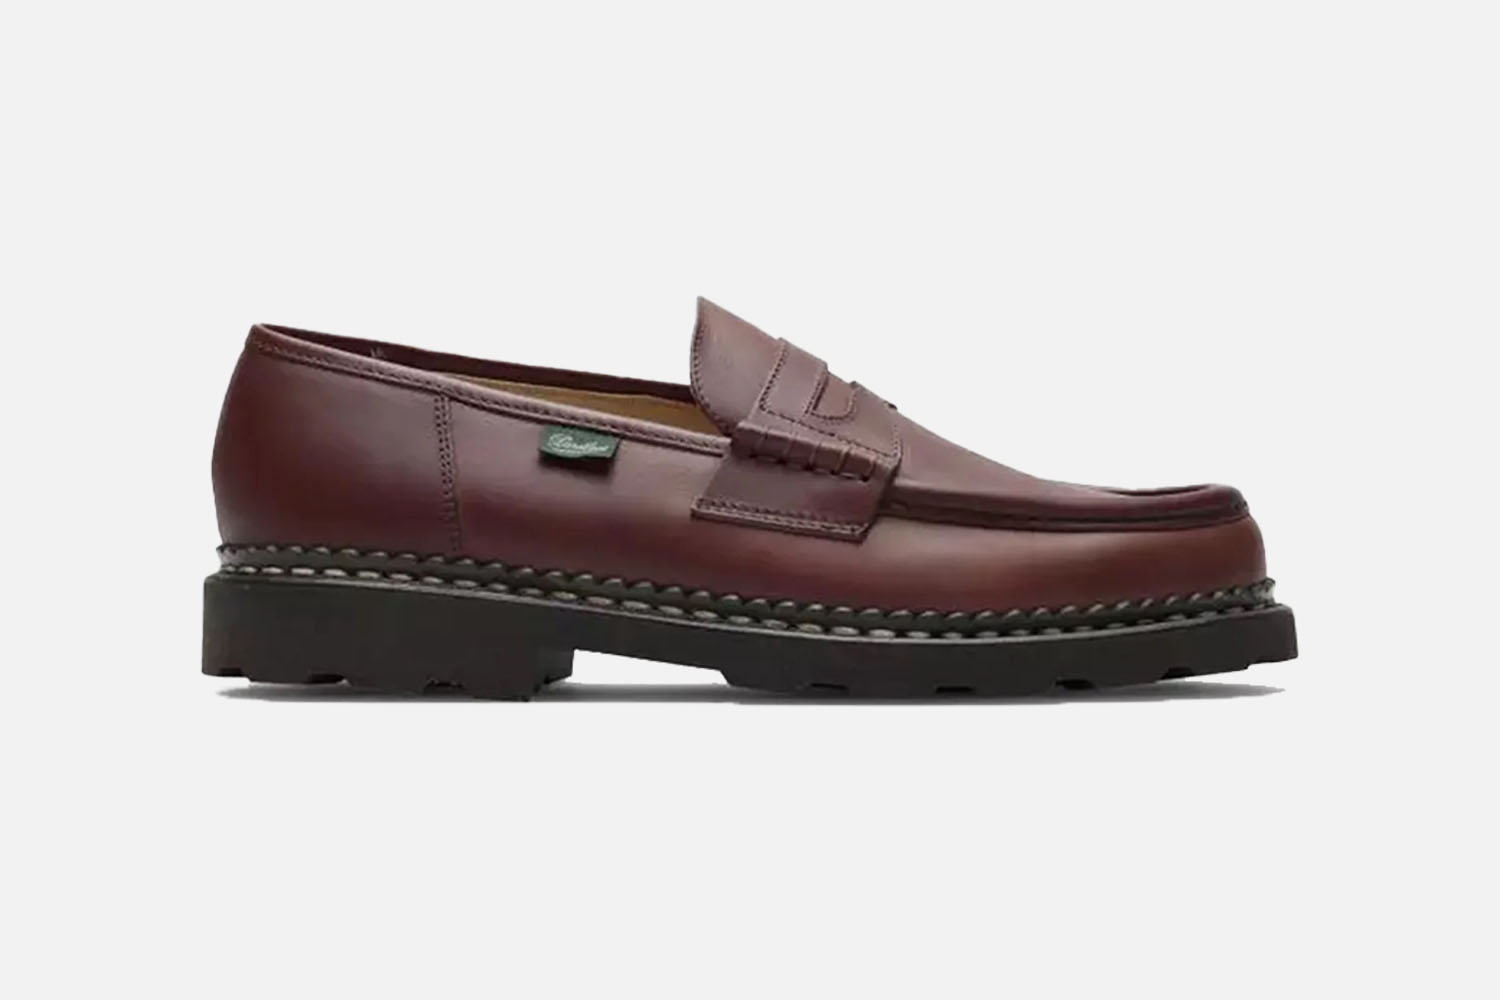 Paraboot Reims Lug Sole Loafers